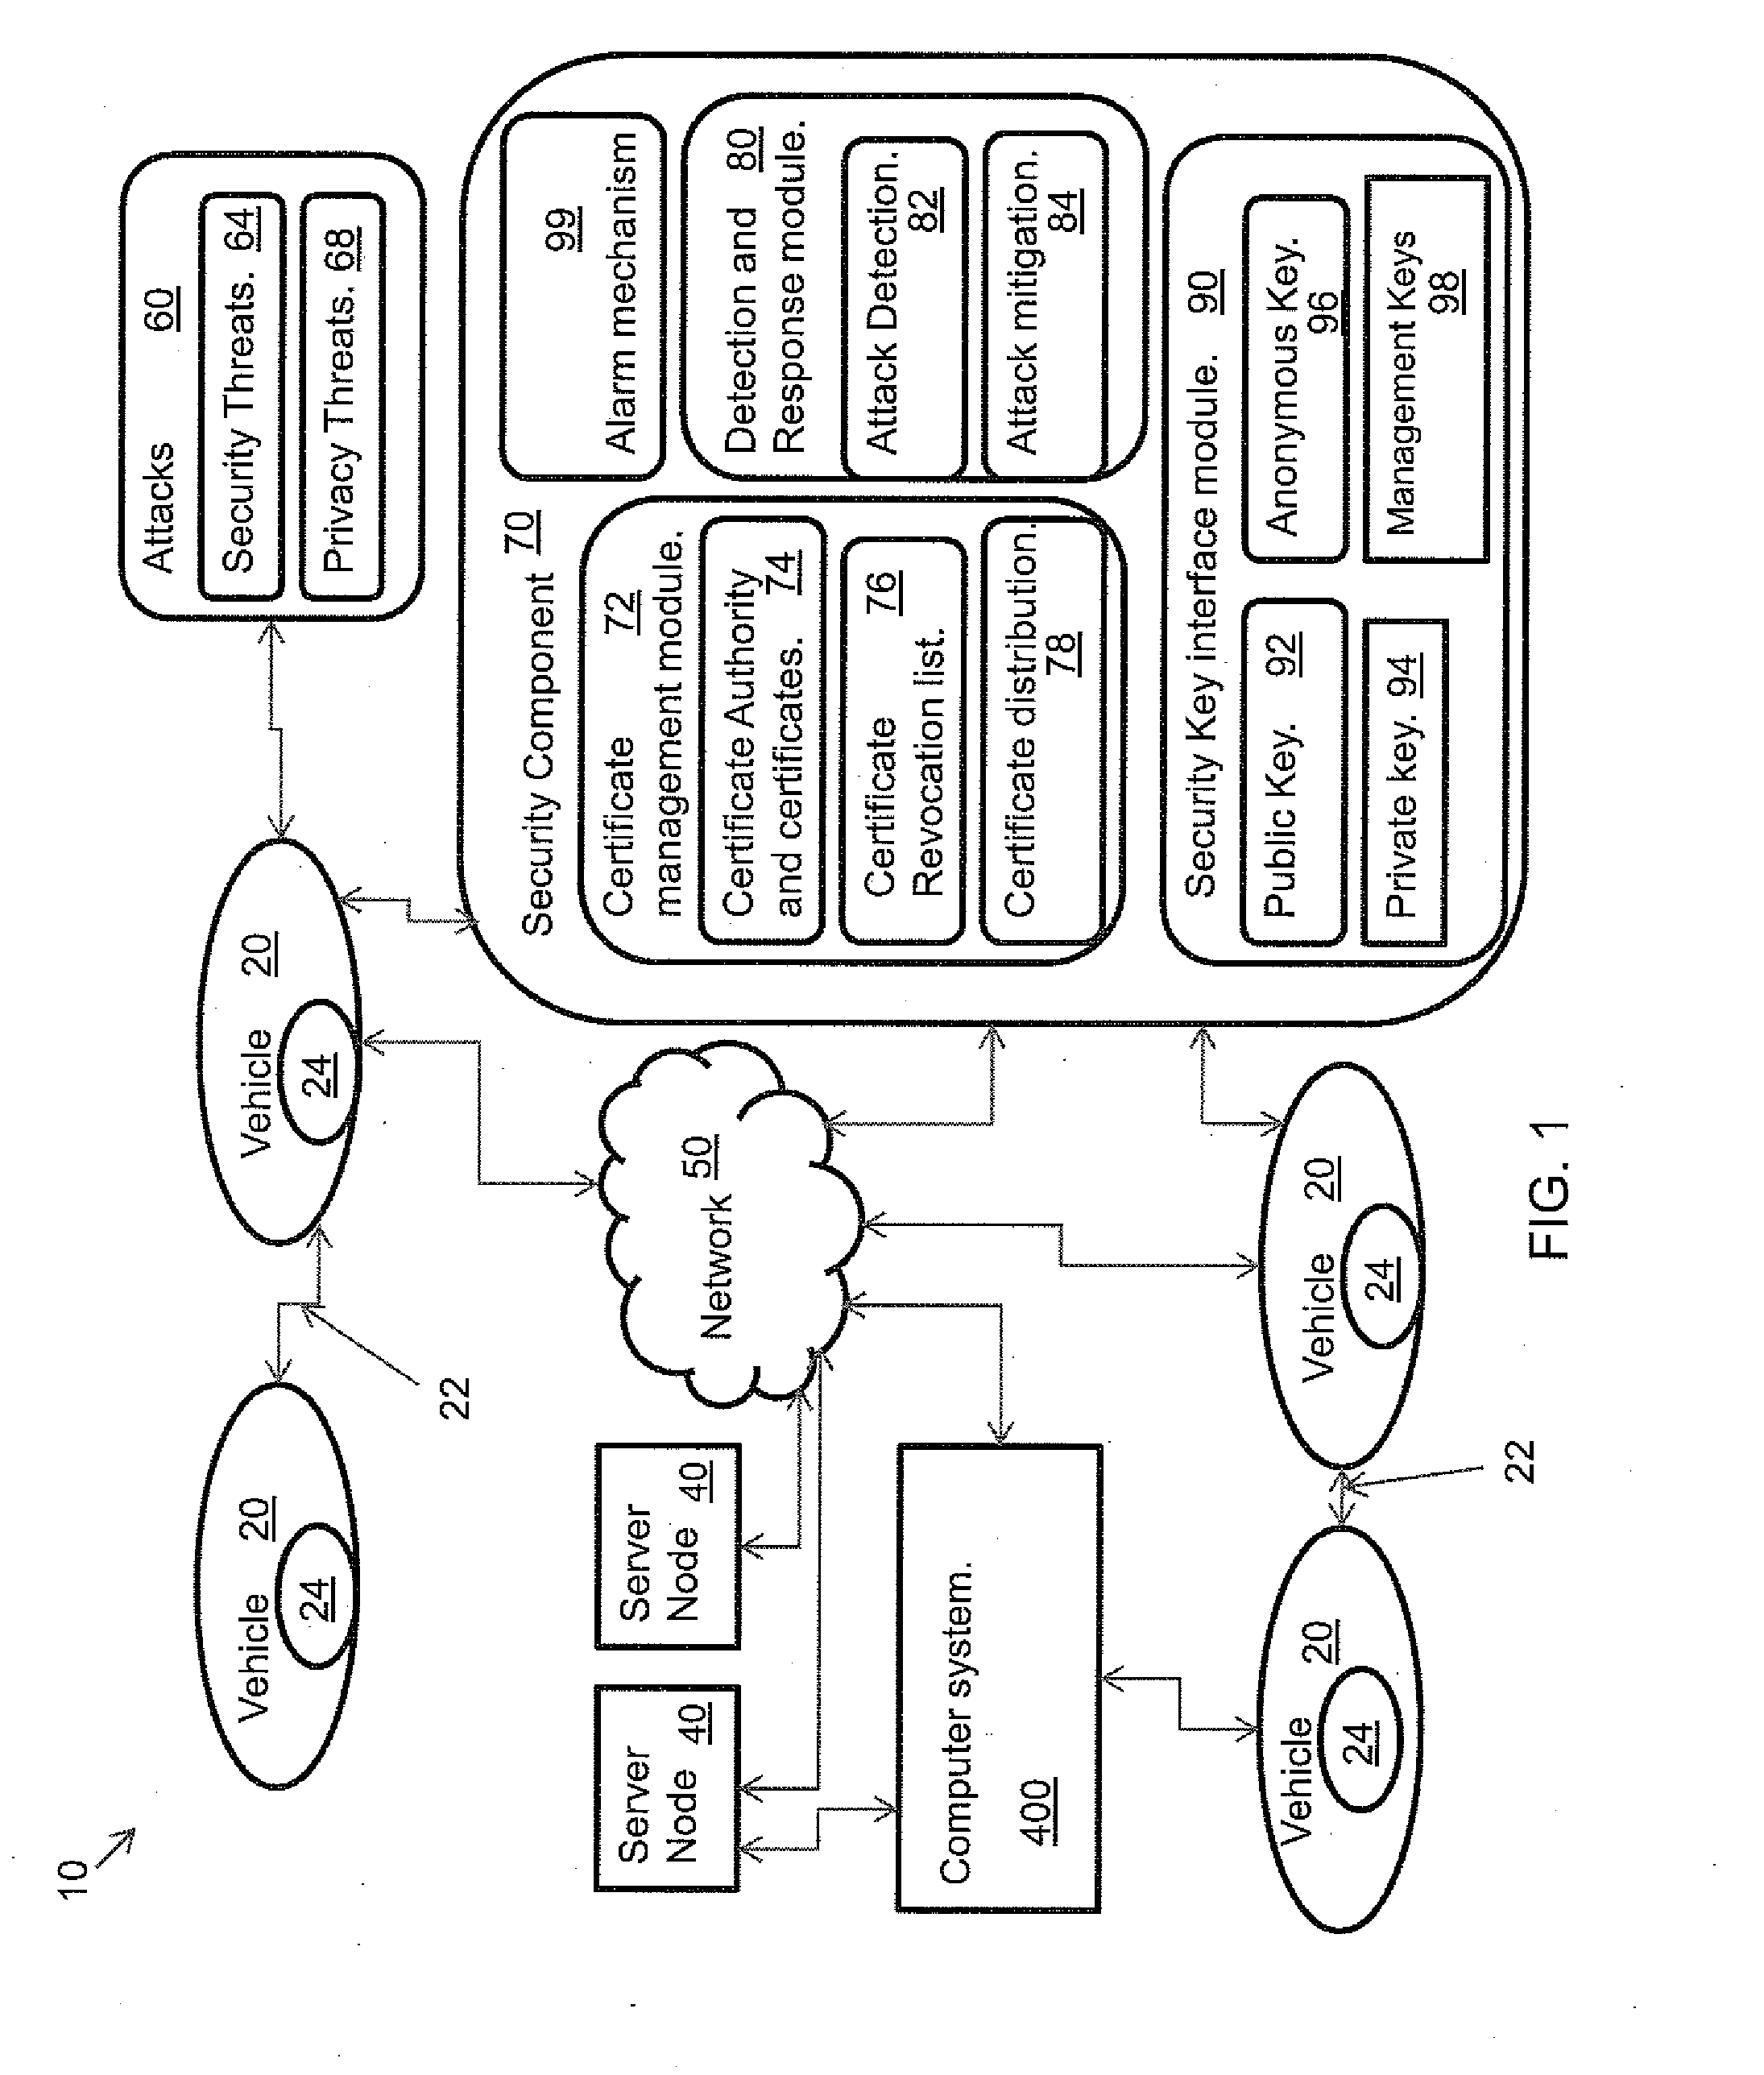 Method for a public-key infrastructure for vehicular networks with limited number of infrastructure servers